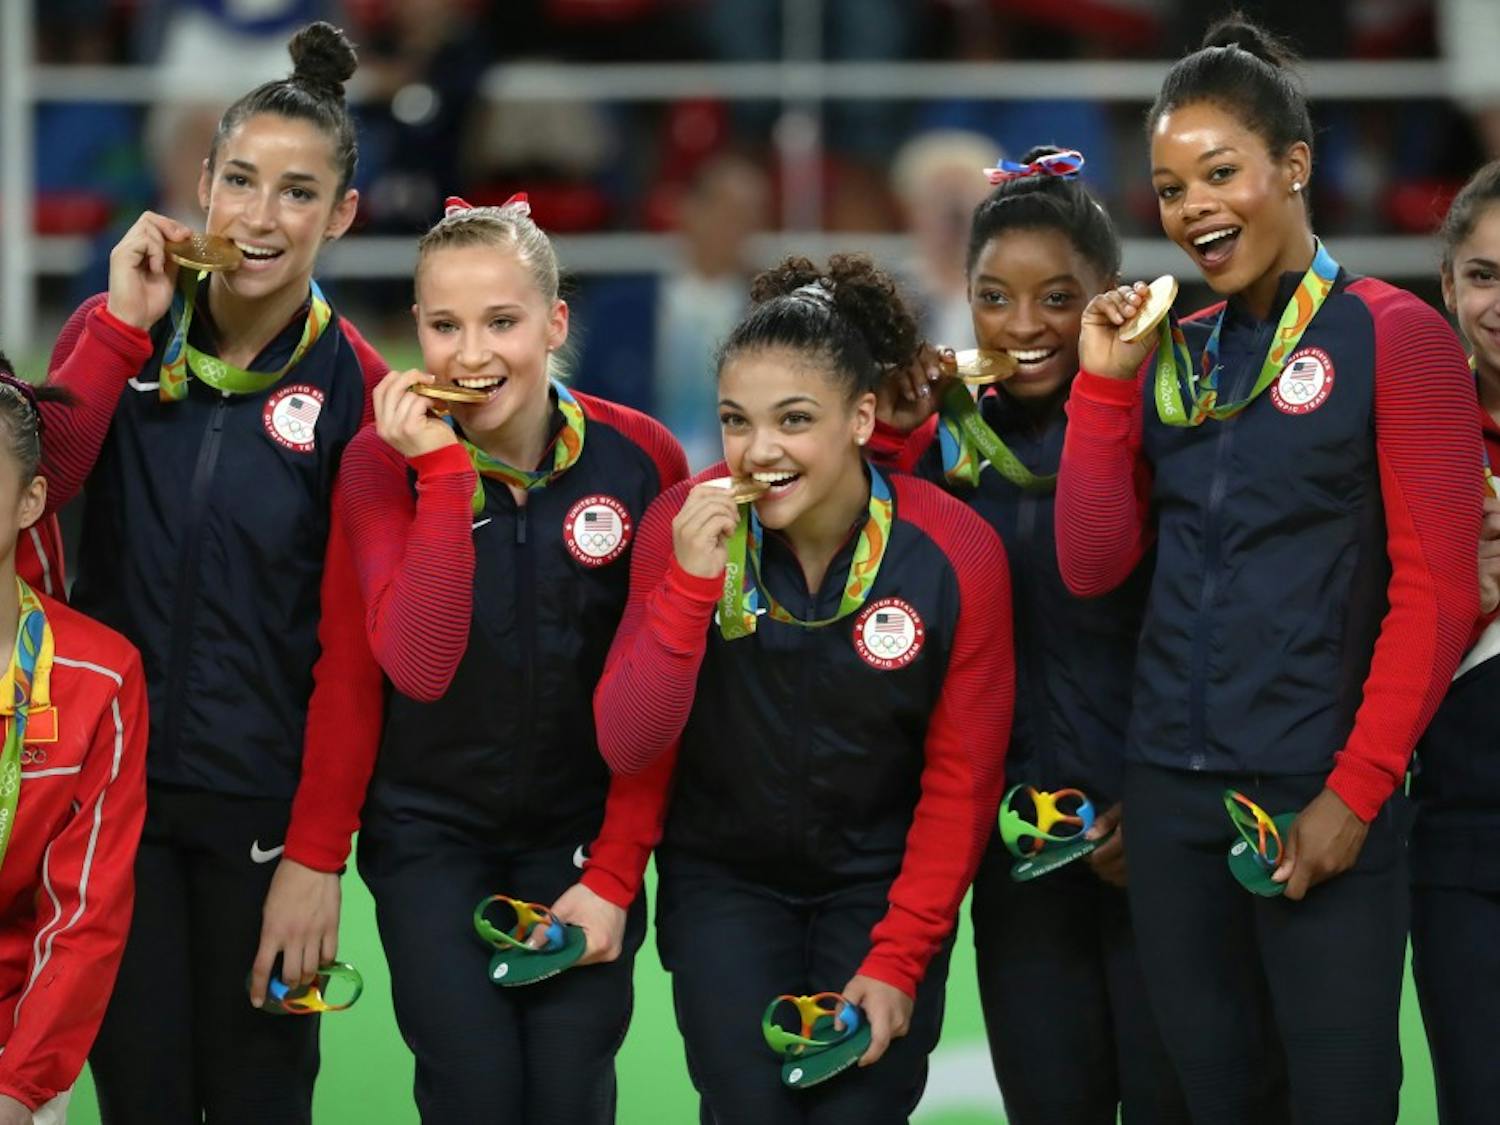 From left, Alexandra Raisman, Madison Kocian, Lauren Hernandez, Simone Biles and Gabby Douglas celebrate on the medal stand on August 9, 2016, at the Rio Olympic Games in Rio De Janeiro, Brazil. The U.S. women's squad captured the gold medal in the team competition. (Brian Peterson/Minneapolis Star Tribune/TNS)